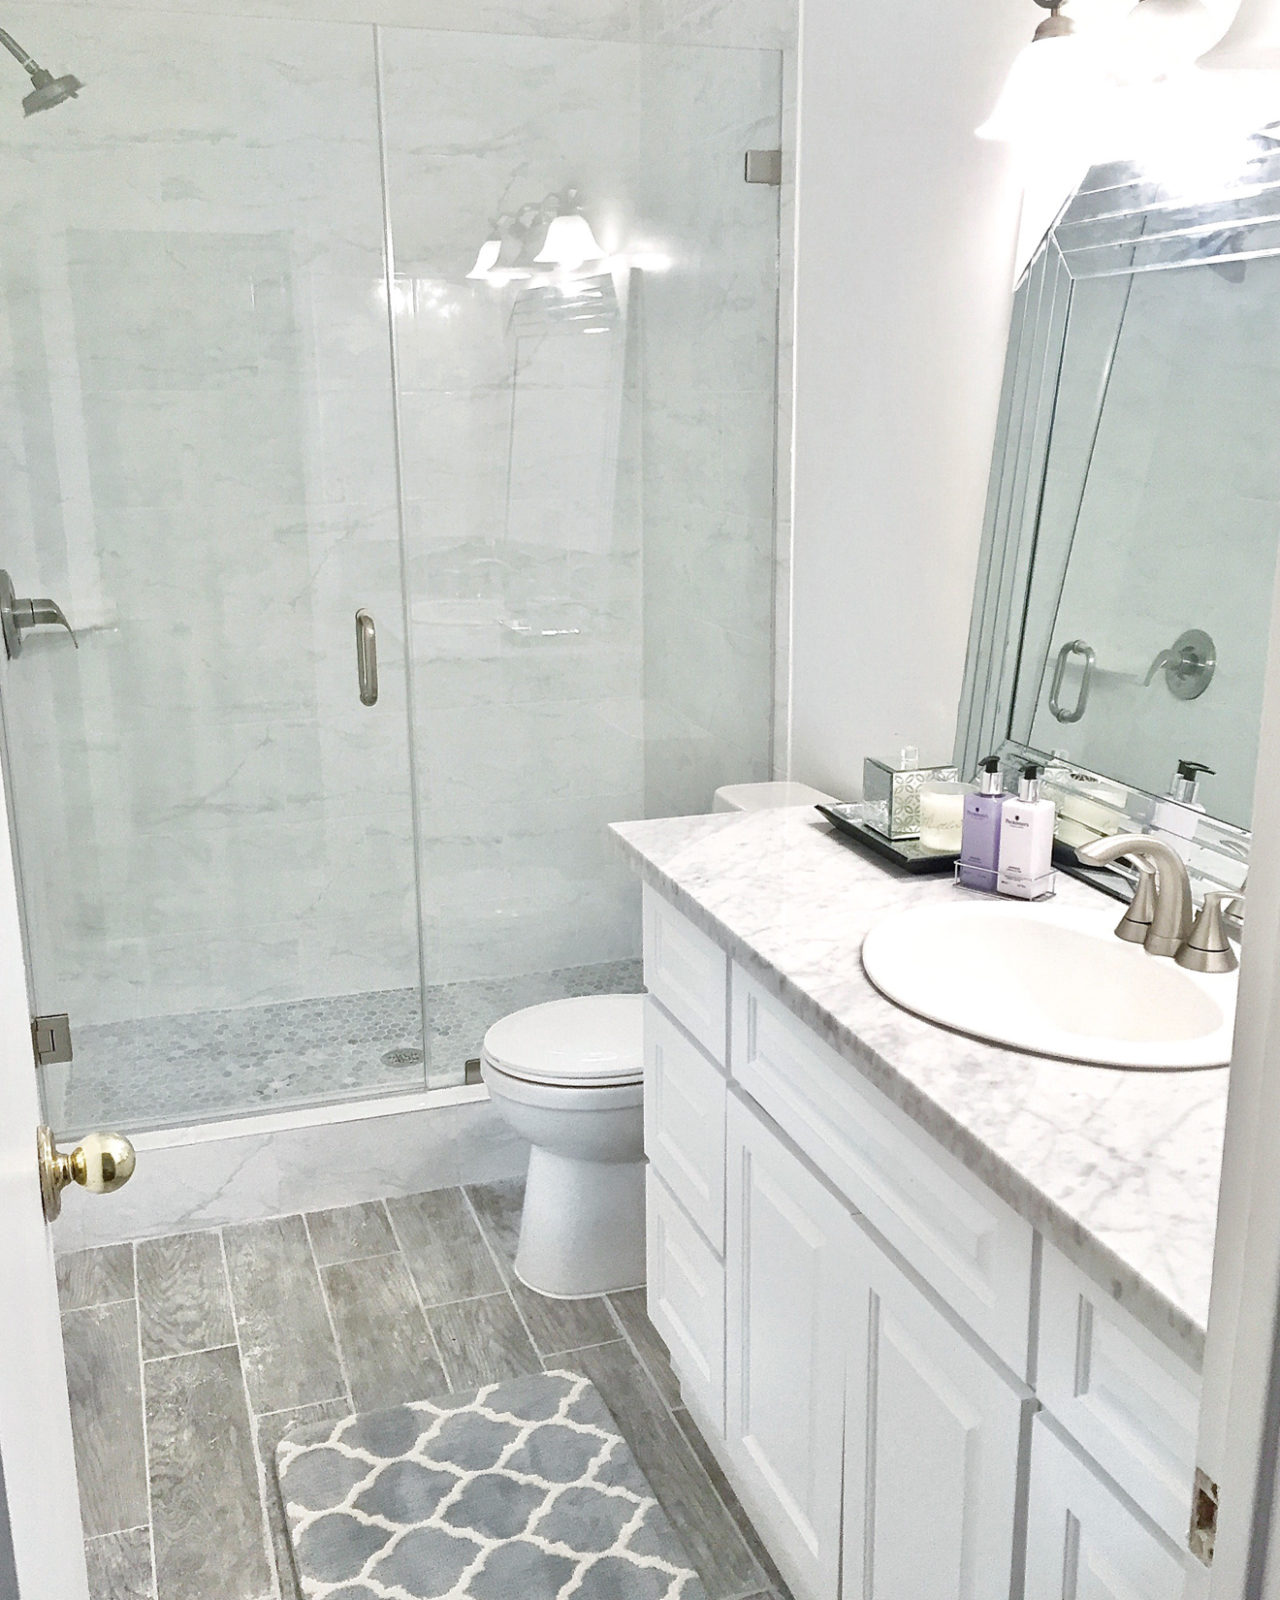 Modern Bathroom Remodel Ideas + Reveal featured by popular US lifestyle blogger, Laura Lily: image of after photo of modern bathroom remodel with gray ceramic faux wood tiles, glass shower doors, gray hexagon tile, marble counter, marble subway tile, custom vanity, and purple towels and rug.